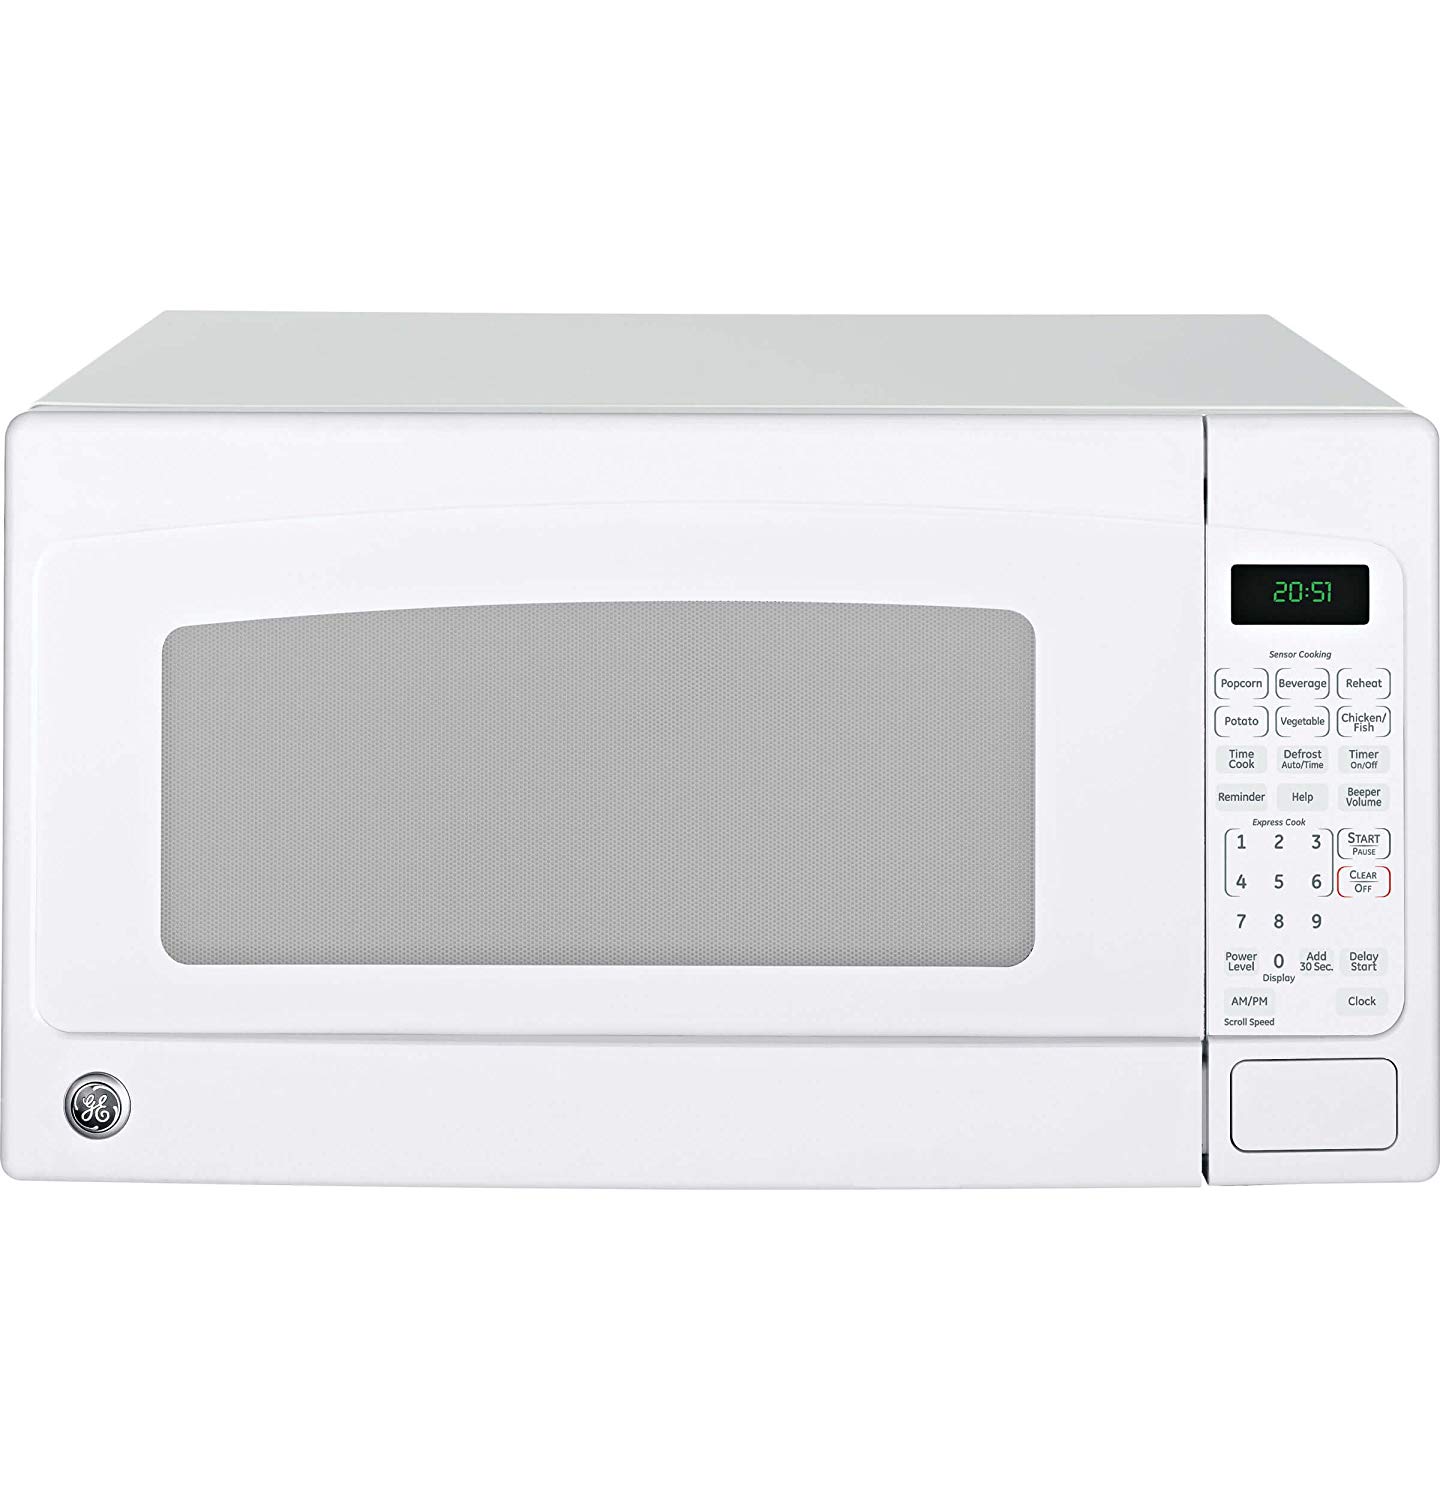 GE JES2051DNWW 2.2 Cu. Ft. Capacity Countertop Microwave Oven – White